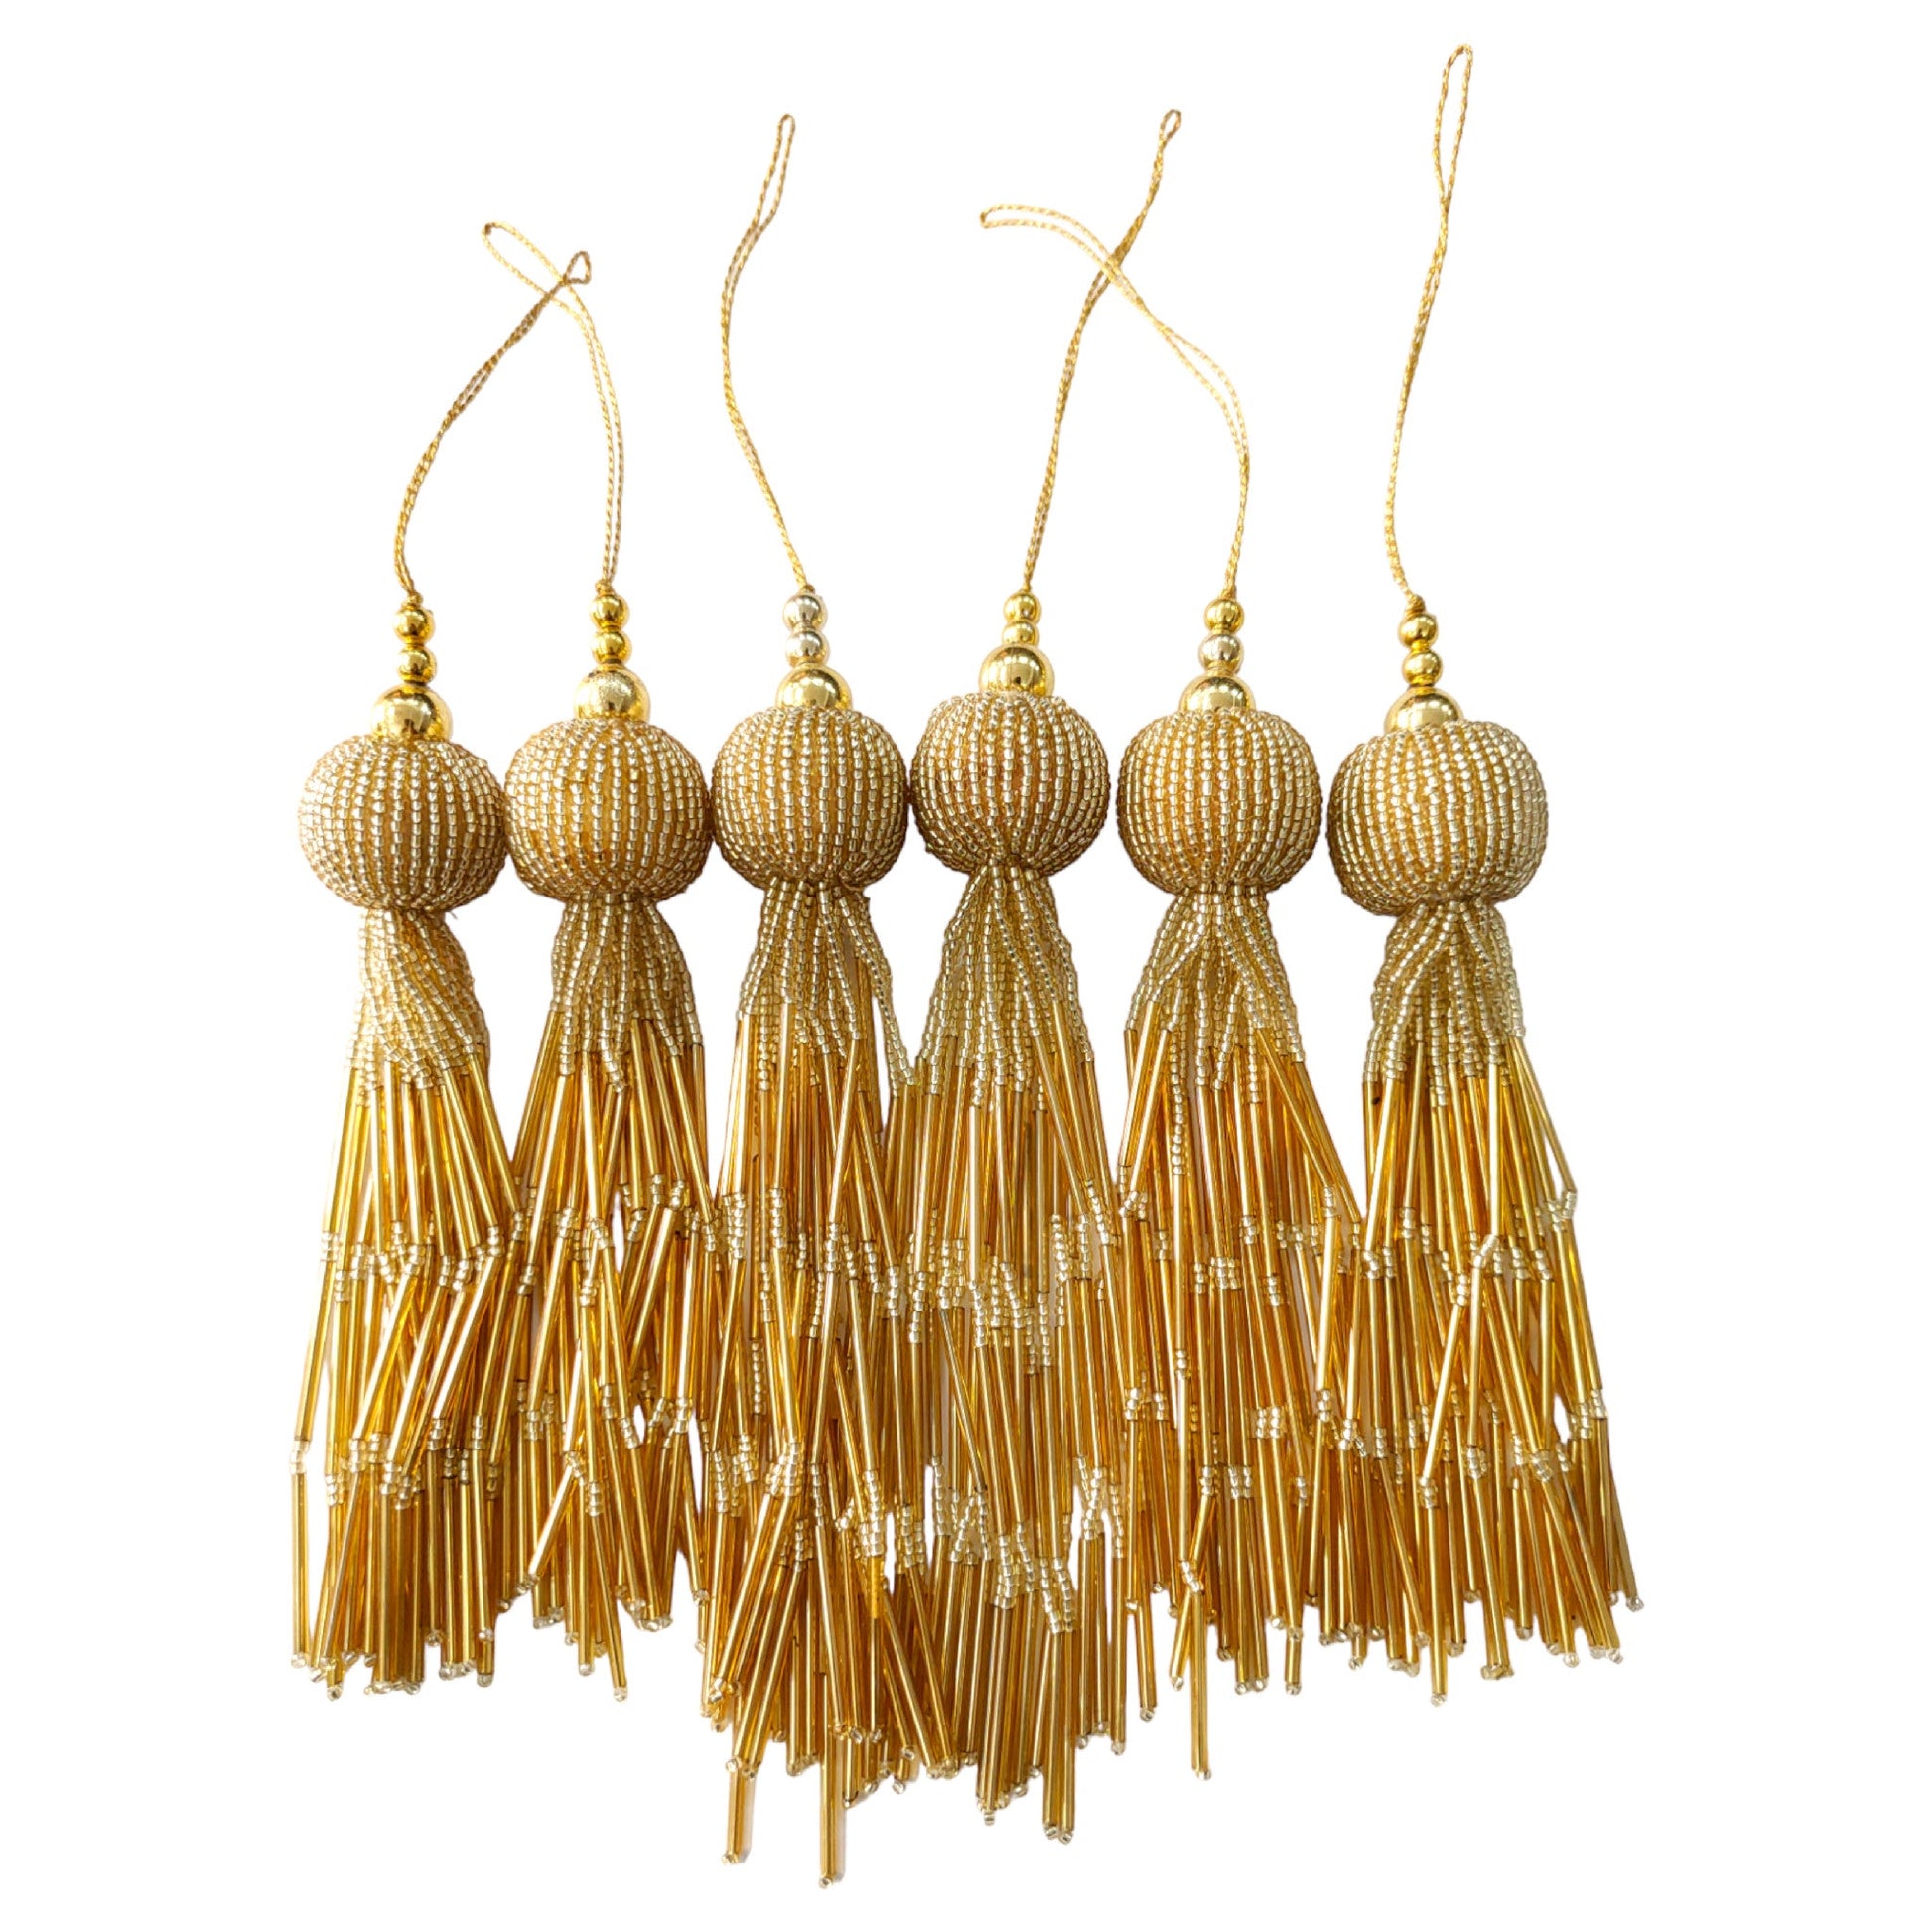 Indian Petals Long Tube Light Fringe with Beaded Ball Tassels for Jewellery Craft or Decoration